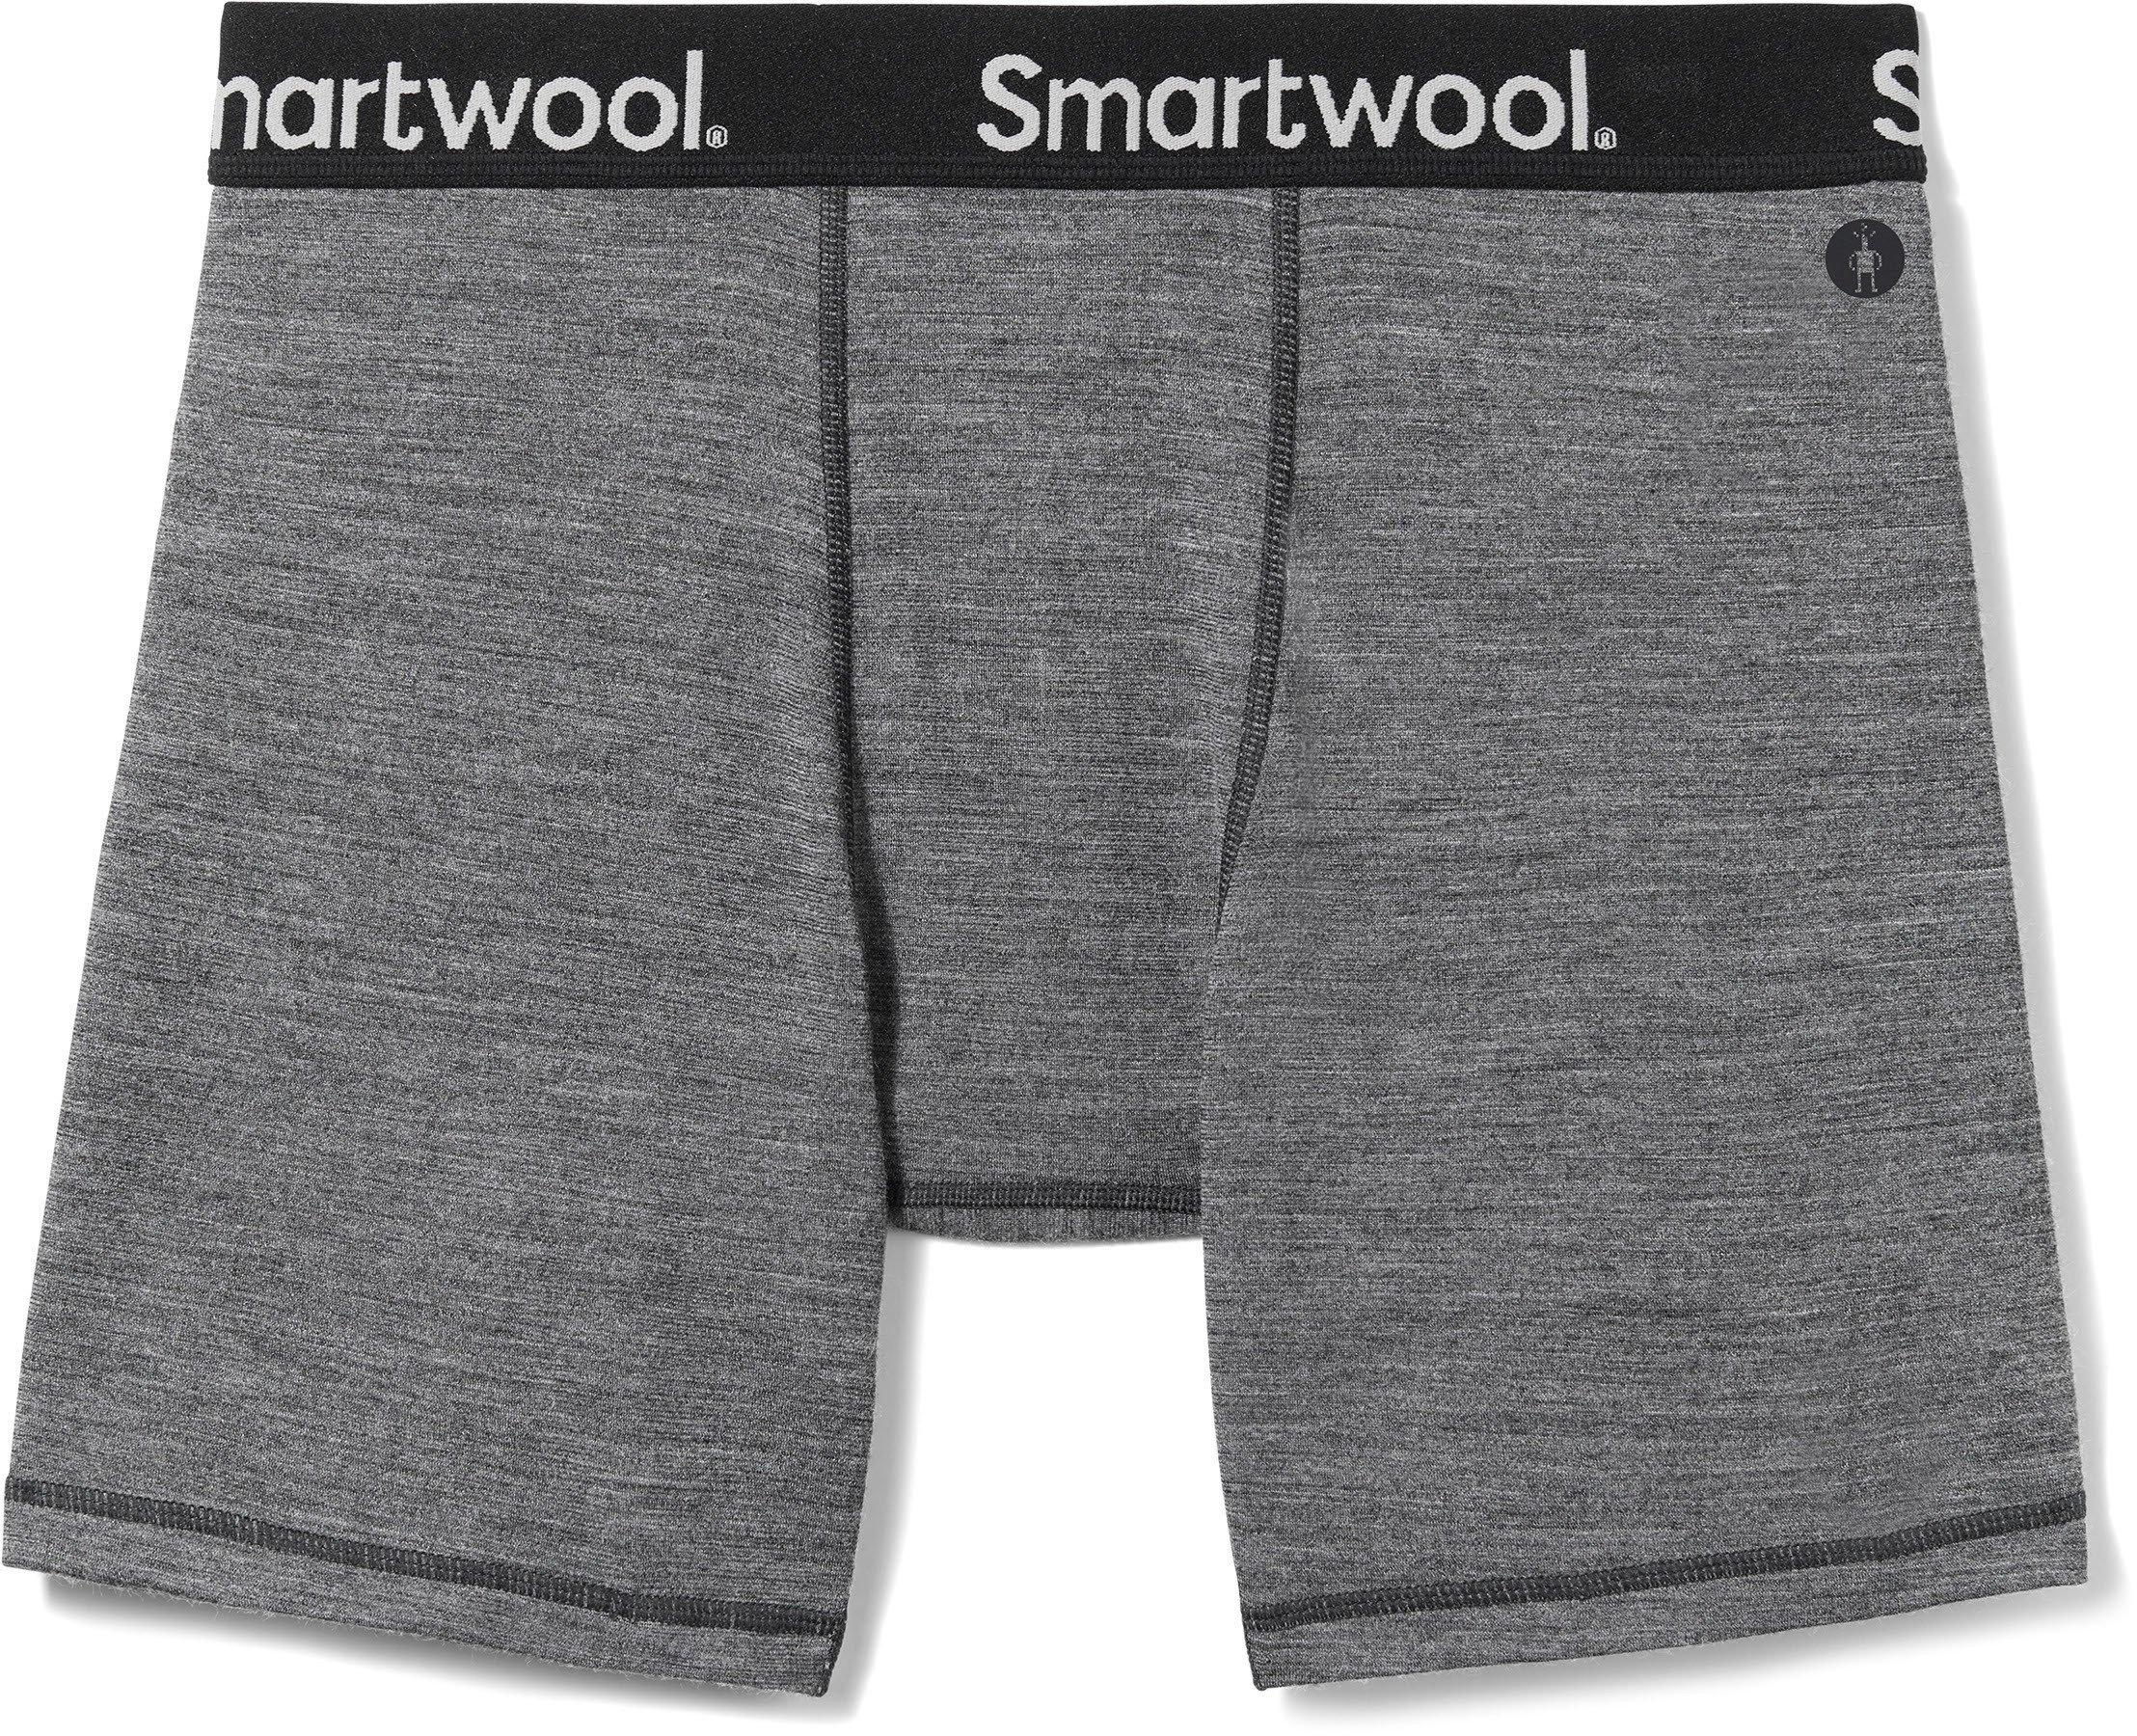 Smartwool M Boxer Brief Boxed XL